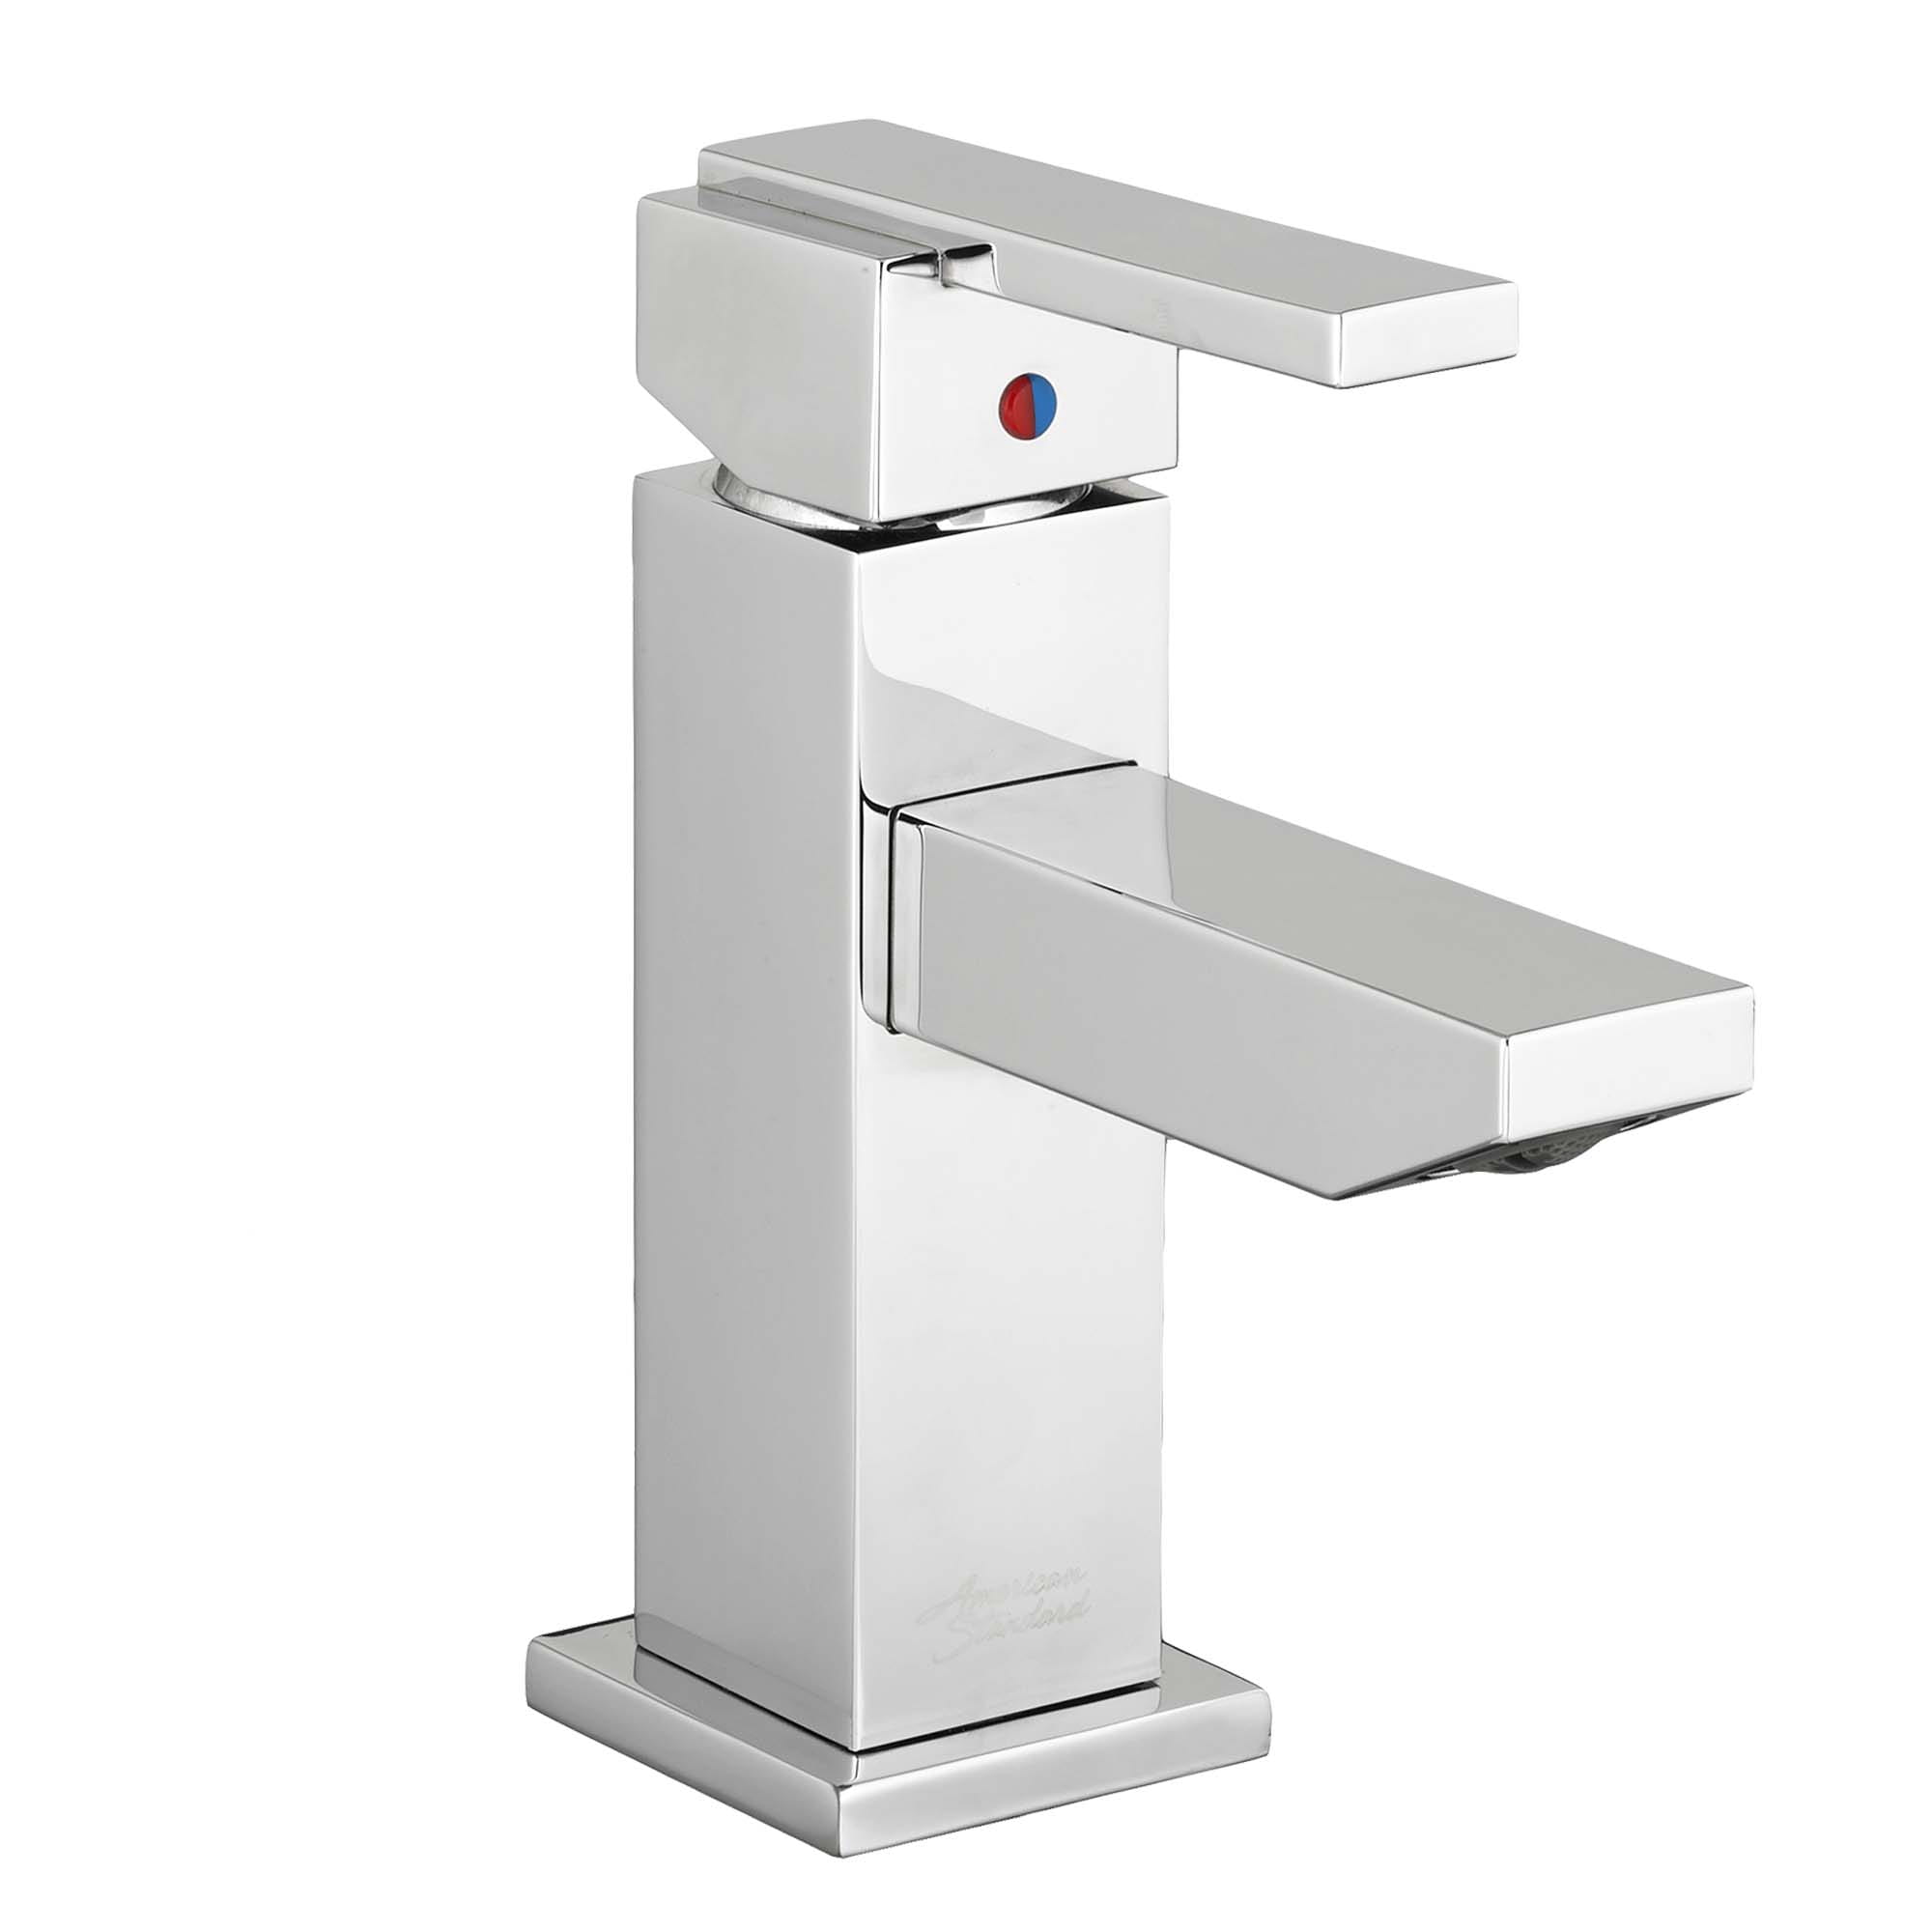 Time Square Single Hole Single Handle Bathroom Faucet 12 gpm 45 L min With Lever Handle CHROME